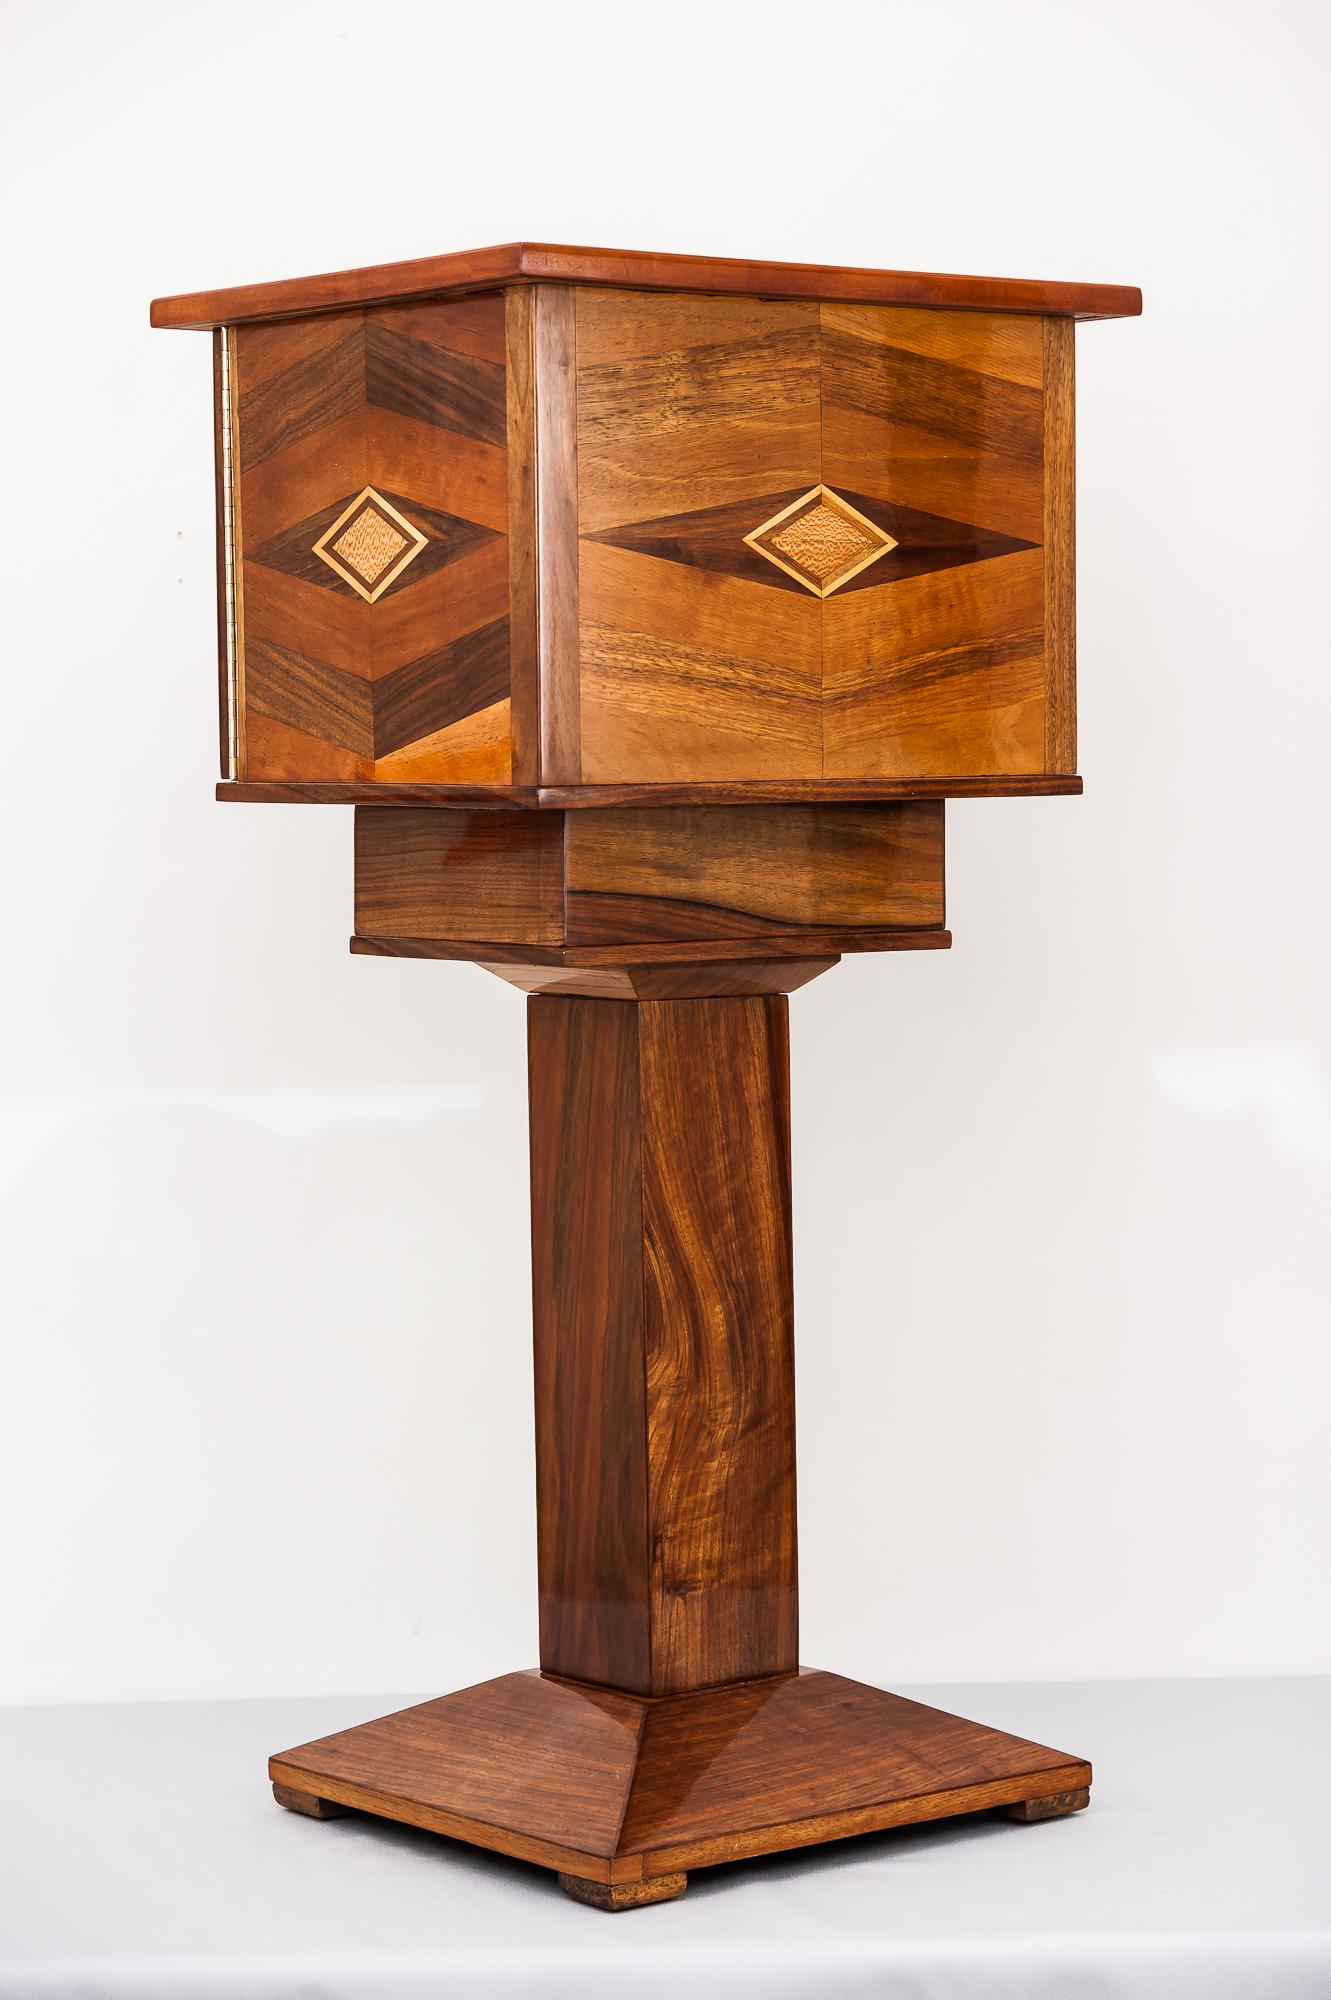 Early 20th Century Art Deco Table with 4 Drawers Execution in Polished Nut Wood with Inlay, 1920s